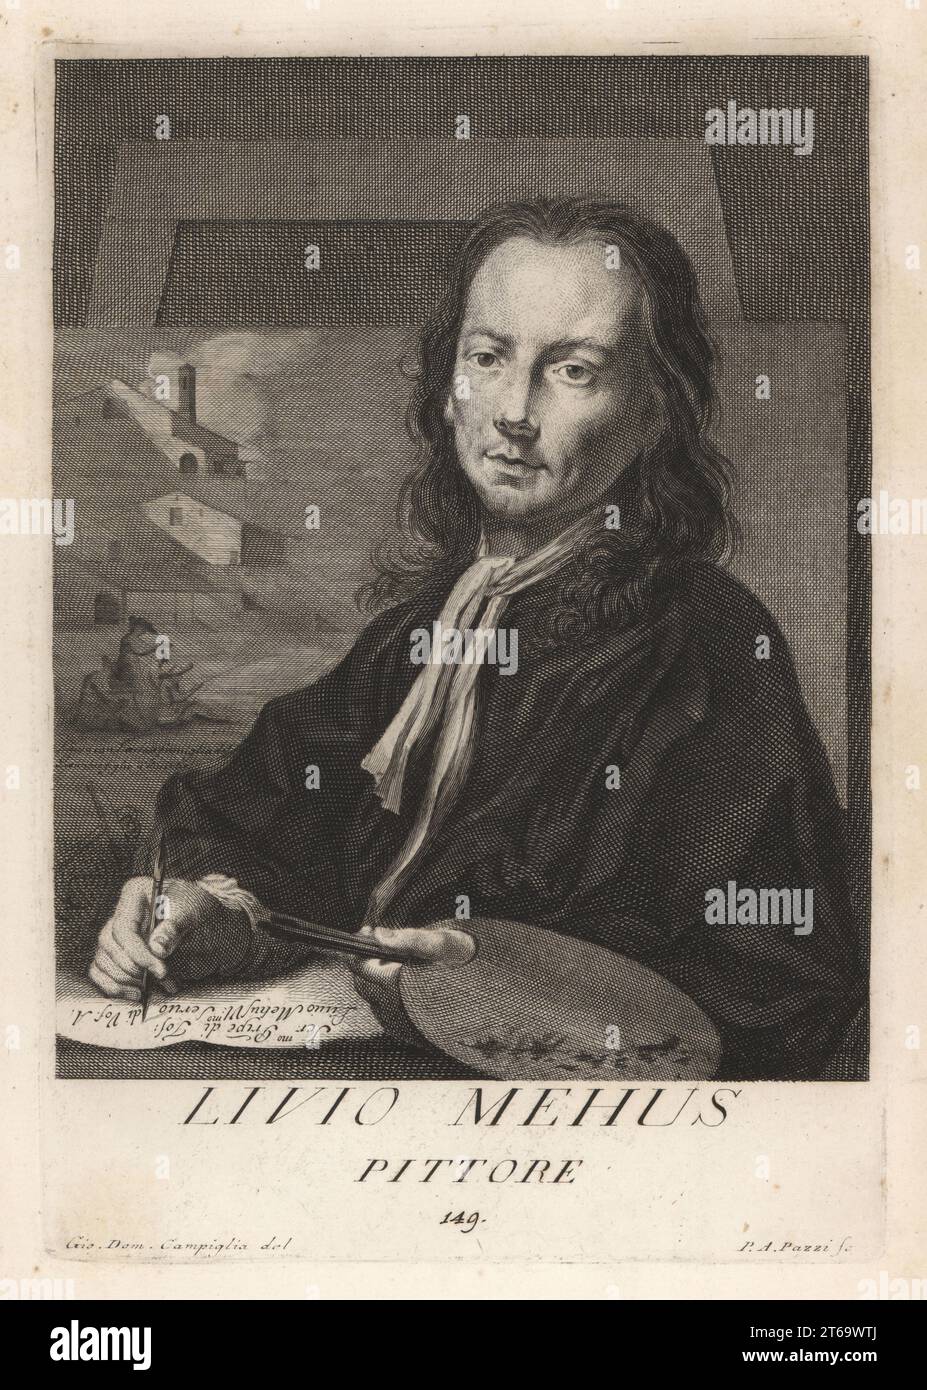 Lieven Mehus, Flemish painter, draughtsman and engraver 1630-1691. Baroque artist who trained in Milan, and worked in Florence. Holding quill pen, paint brush and palette before a canvas and easel. Livio Mehus, Pittore. Copperplate engraving by Pietro Antonio Pazzi after Giovanni Domenico Campiglia after a self portrait by the artist from Francesco Moucke's Museo Florentino (Museum Florentinum), Serie di Ritratti de Pittori (Series of Portraits of Painters) stamperia Mouckiana, Florence, 1752-62. Stock Photo